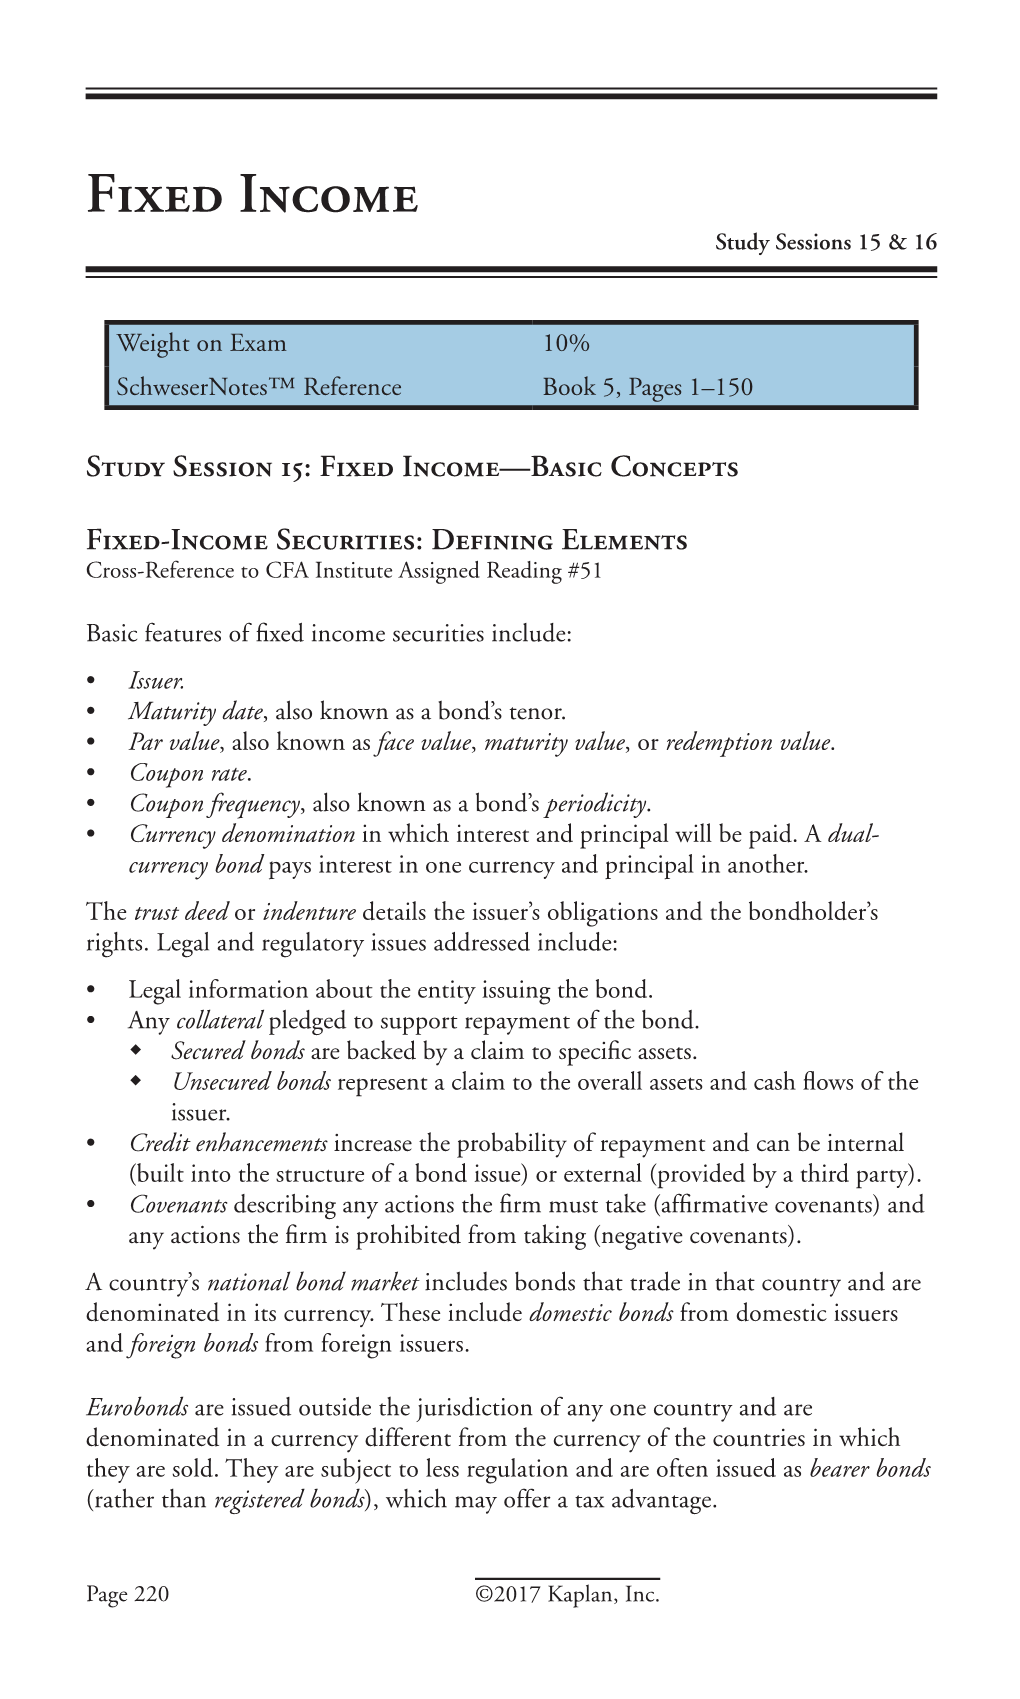 Fixed Income Study Sessions 15 & 16